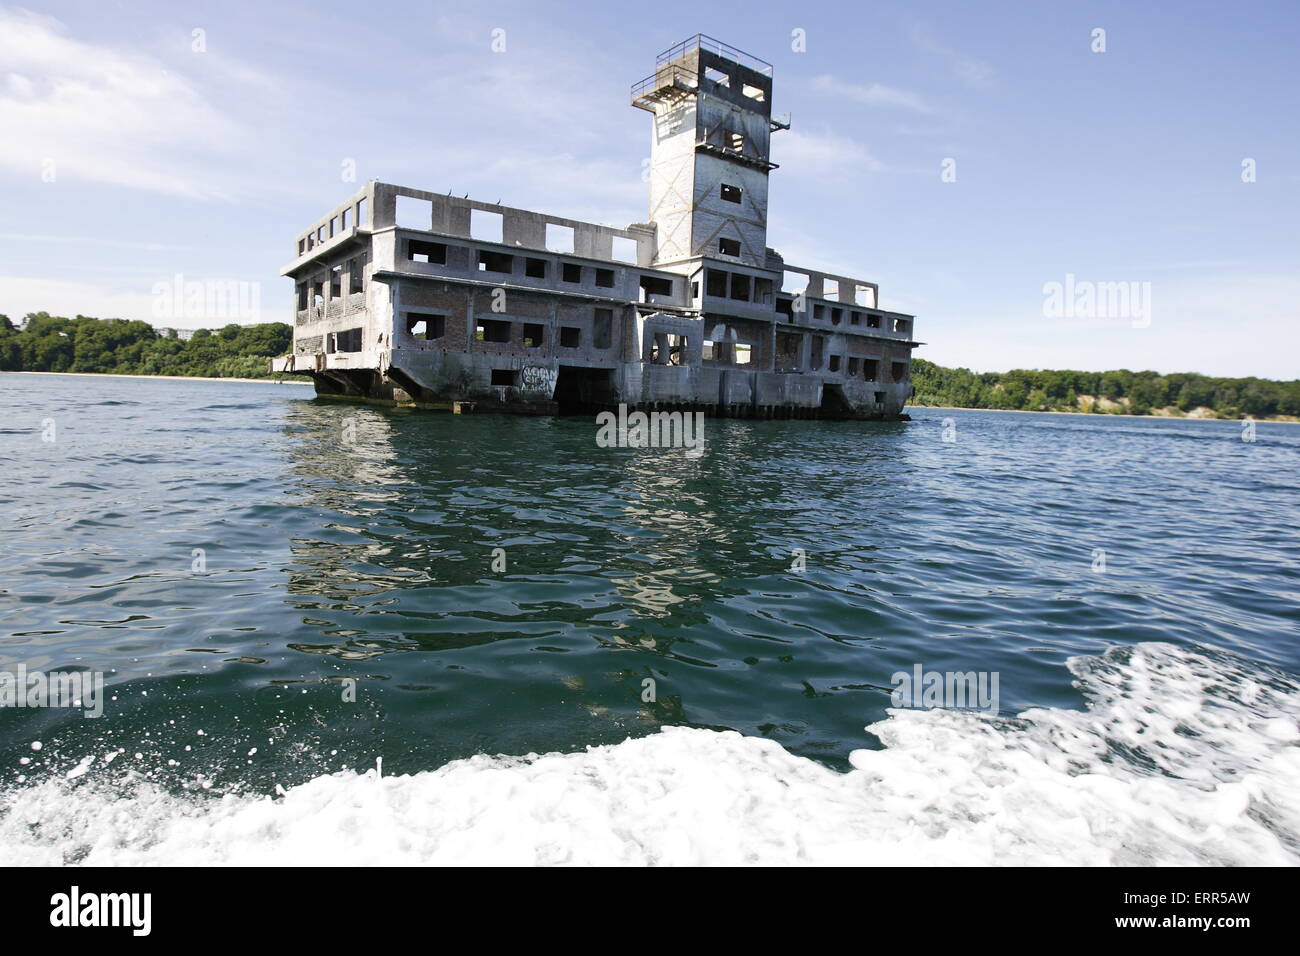 Gdynia, Poland 7th, June 2015 Pictured: Torpedownia - German nazi building of the torpedoes research centre, built on Polish terriery during the Second World War. Torpedownia was a torpedo assembly hall with devices for test shooting, built at the bottom of the basin, just a few hundred meters from the shore. Stock Photo